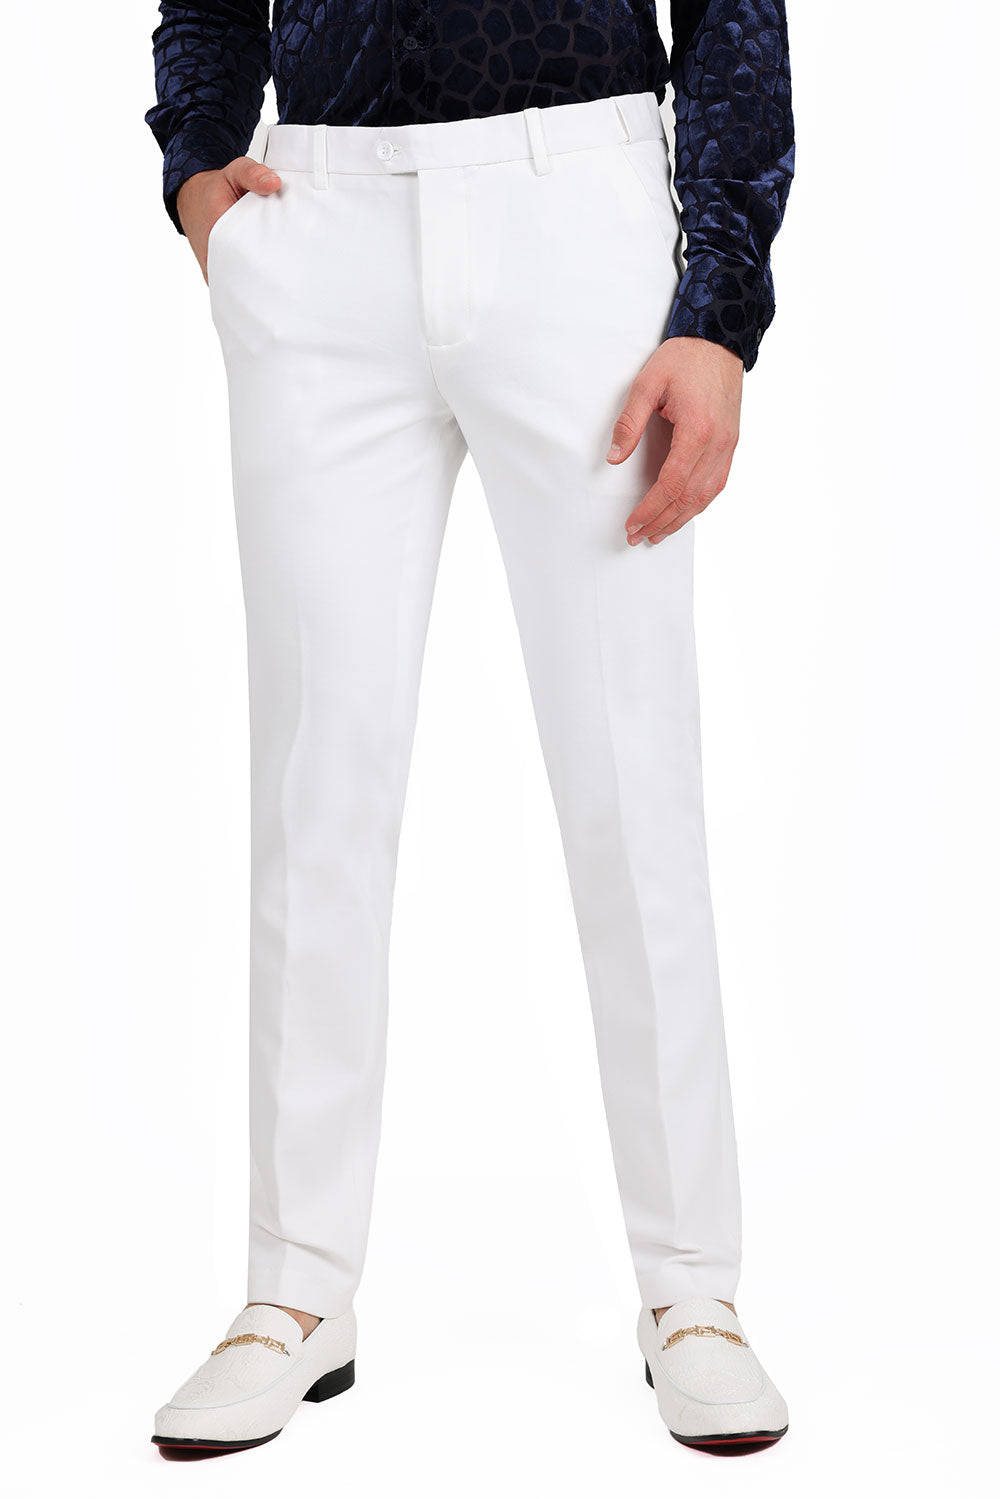 Barabas Men's Solid Color Basic Essential Chino Dress Pants 2CP196 White